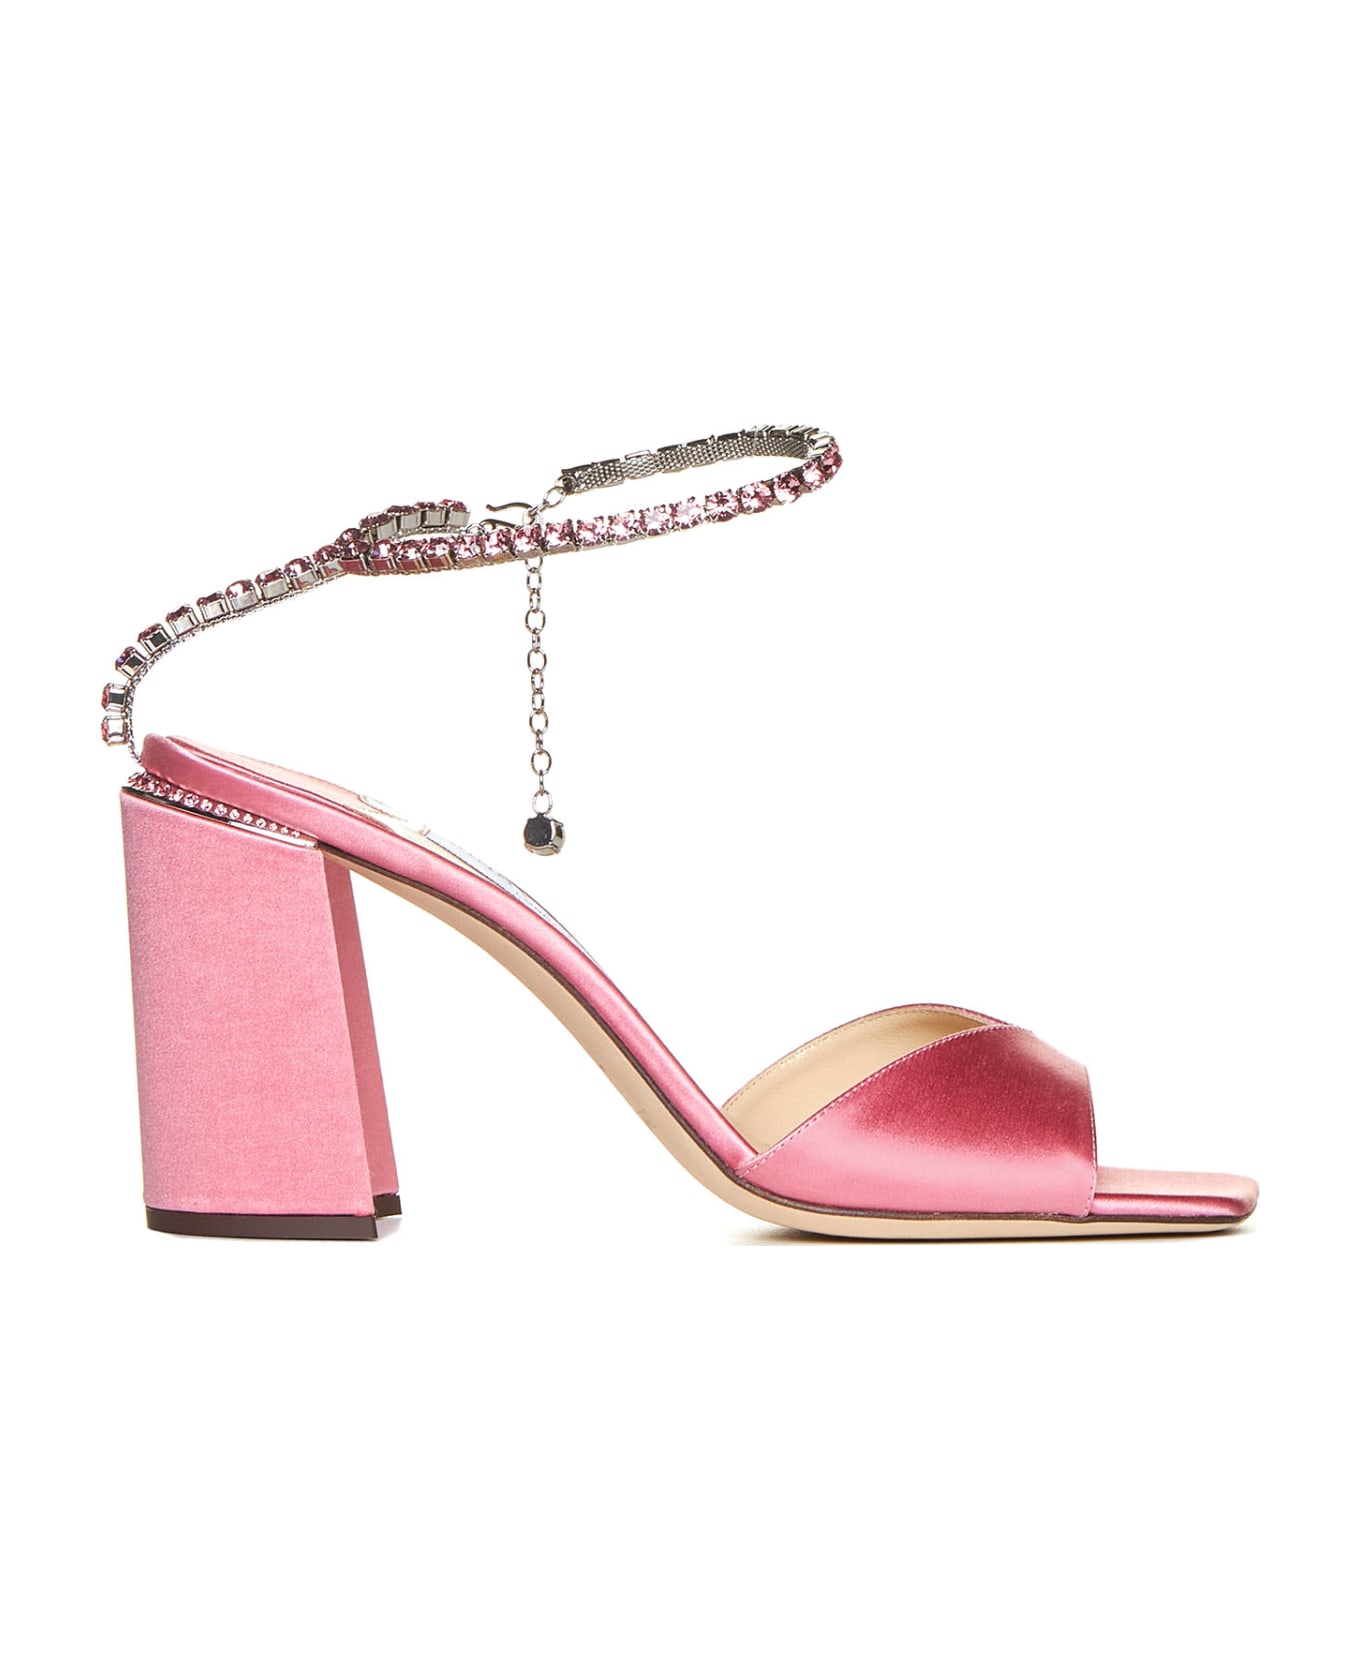 Jimmy Choo Sandals - Candy pink/candy pink